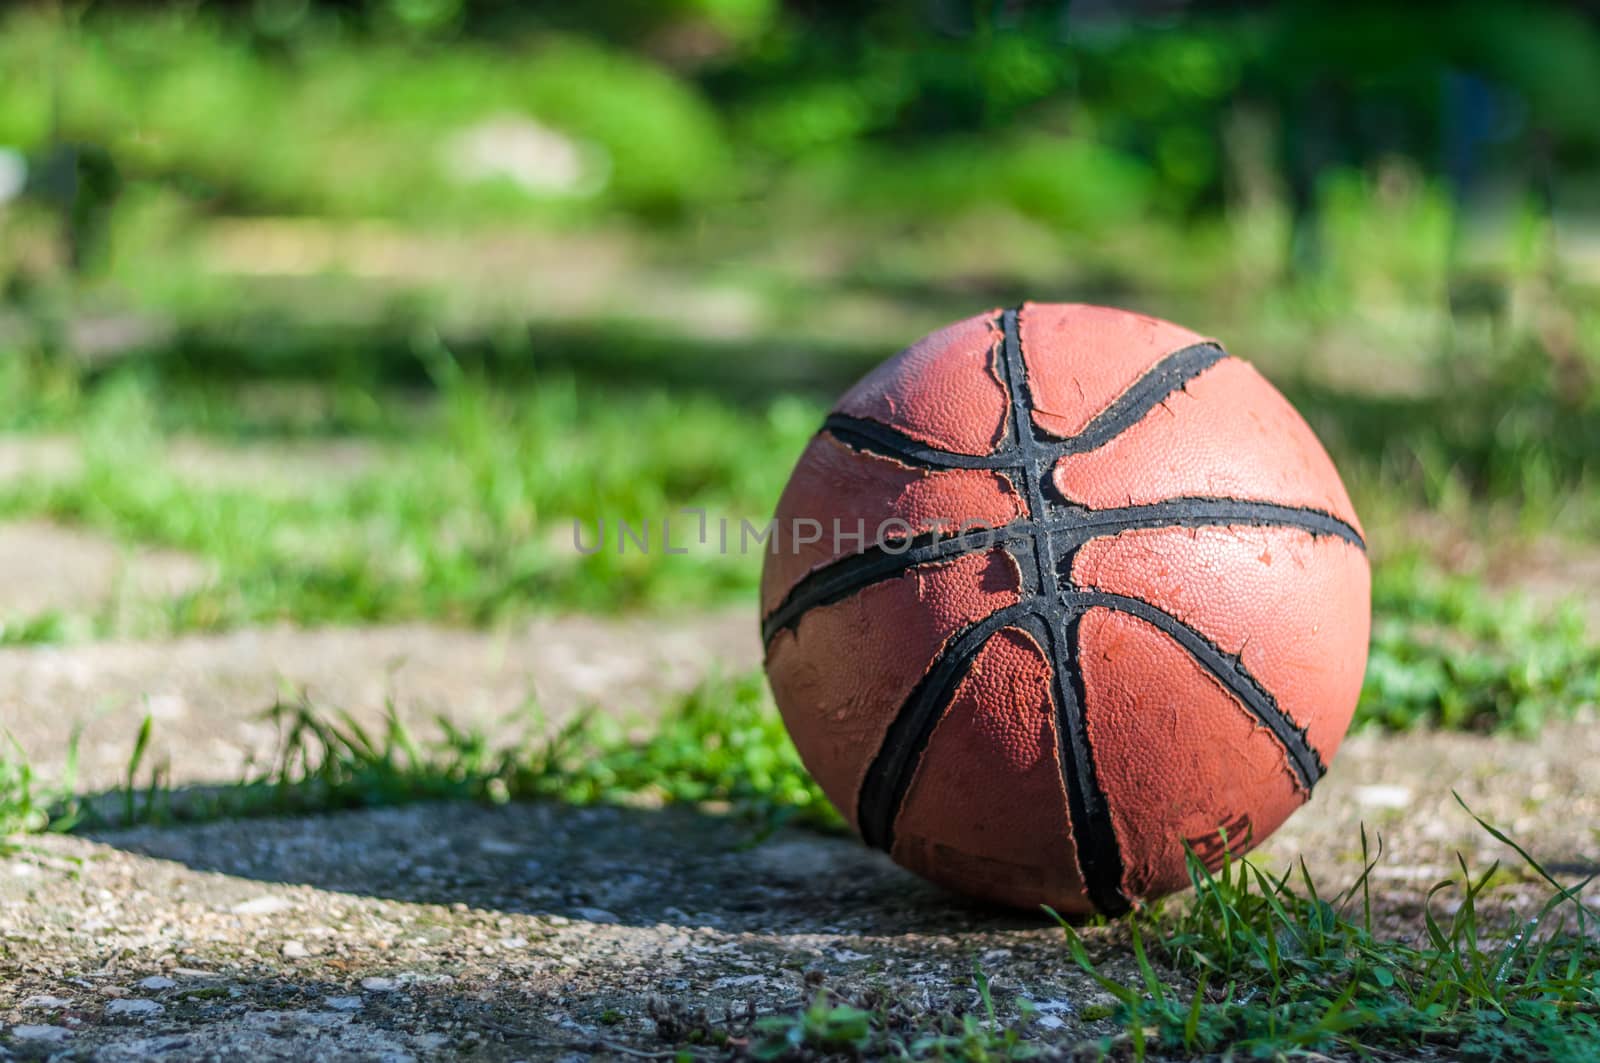 Used basketball in country playground in a sunny morning